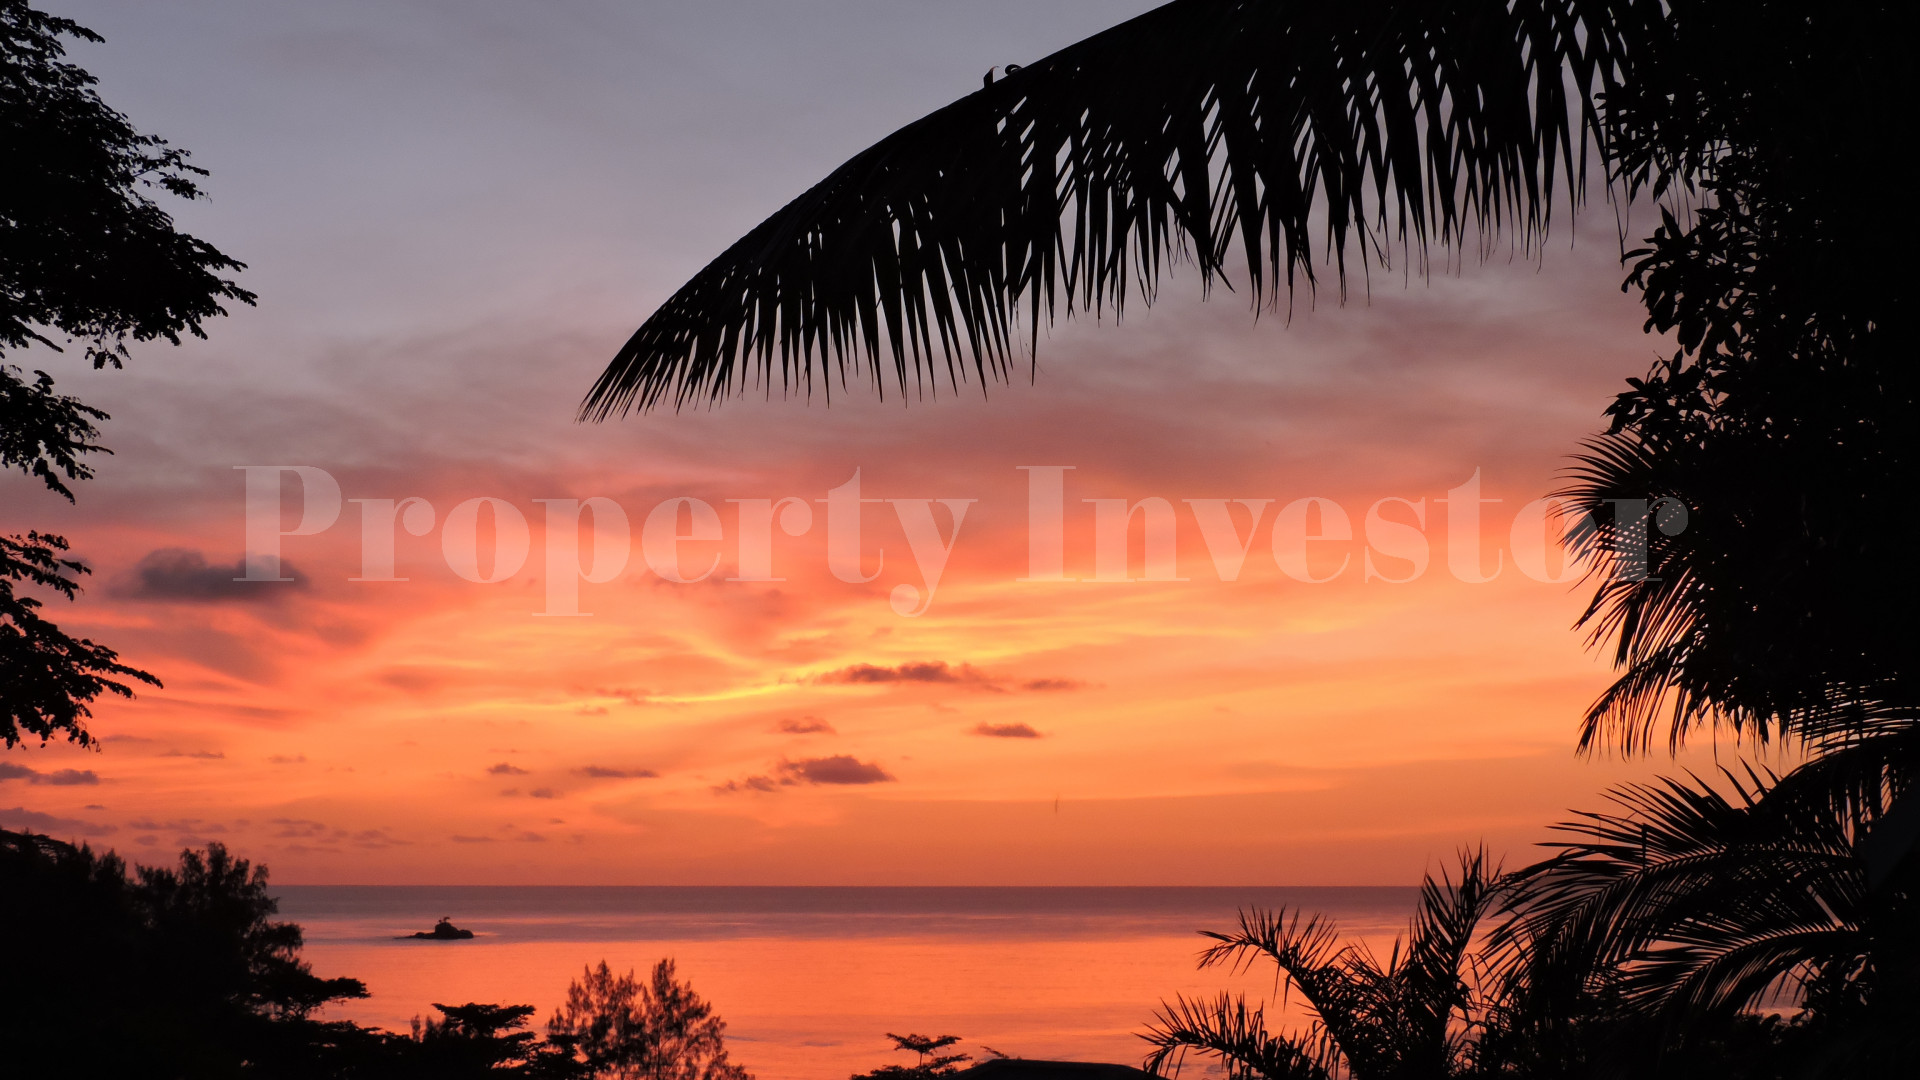 Lush 6 Bedroom Sea View Property Set on Landscaped Tropical Gardens in Mahé, Seychelles